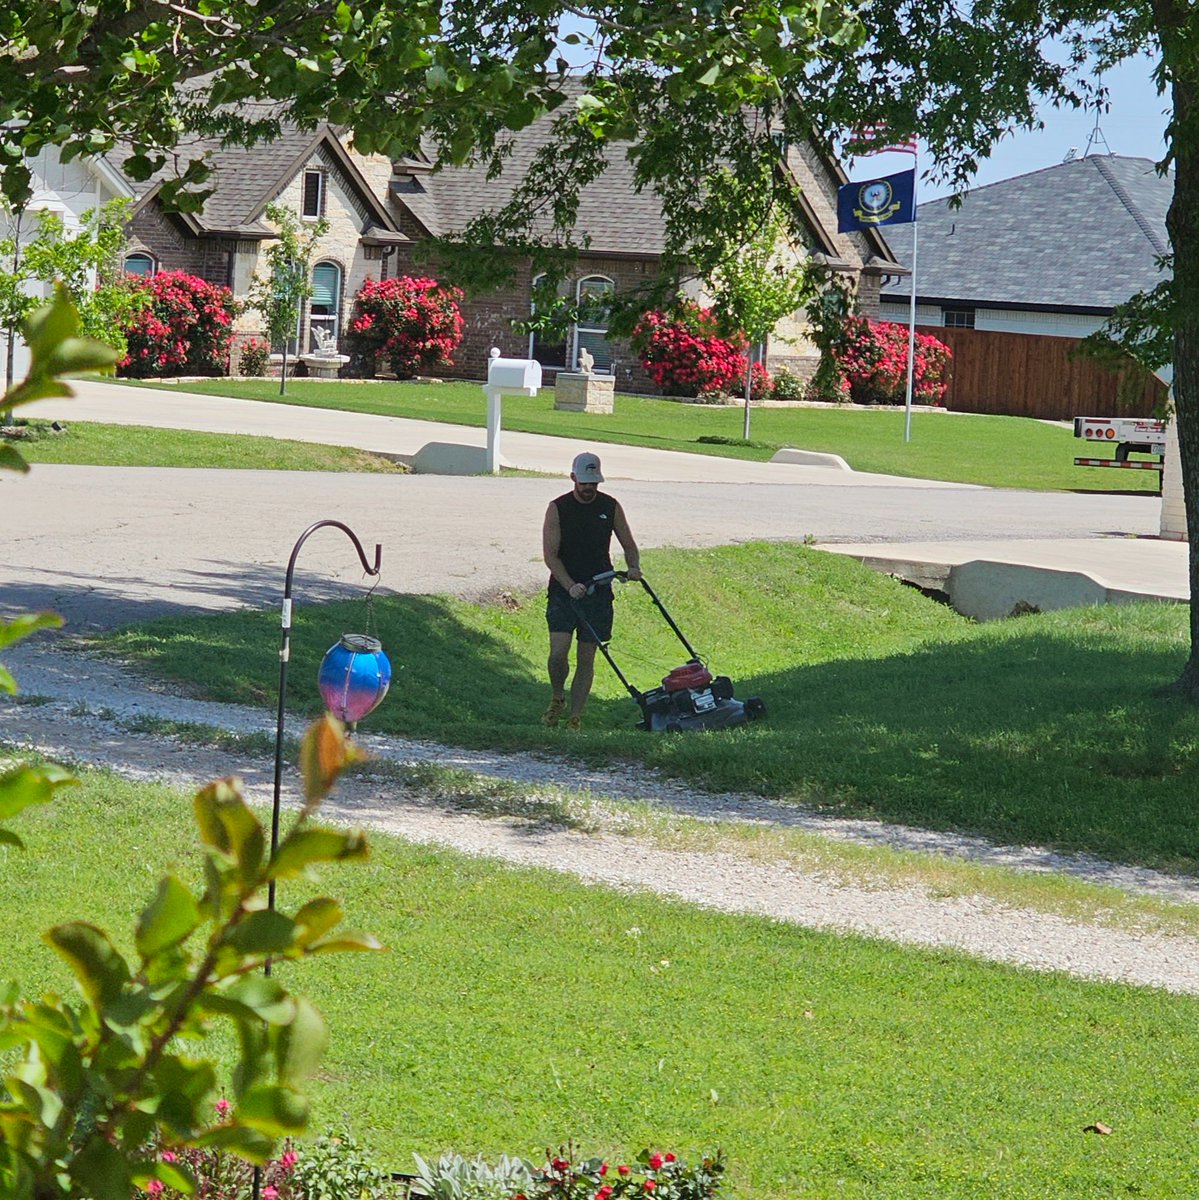 Me and my neighbor have this unspoken act of kindness that we do for each other, where whoever is mowing their lawn, mows the others ditch. We've never spoken about it, but we've been doing it for years. I think it's pretty cool. (That's him mowing the ditch on my side)